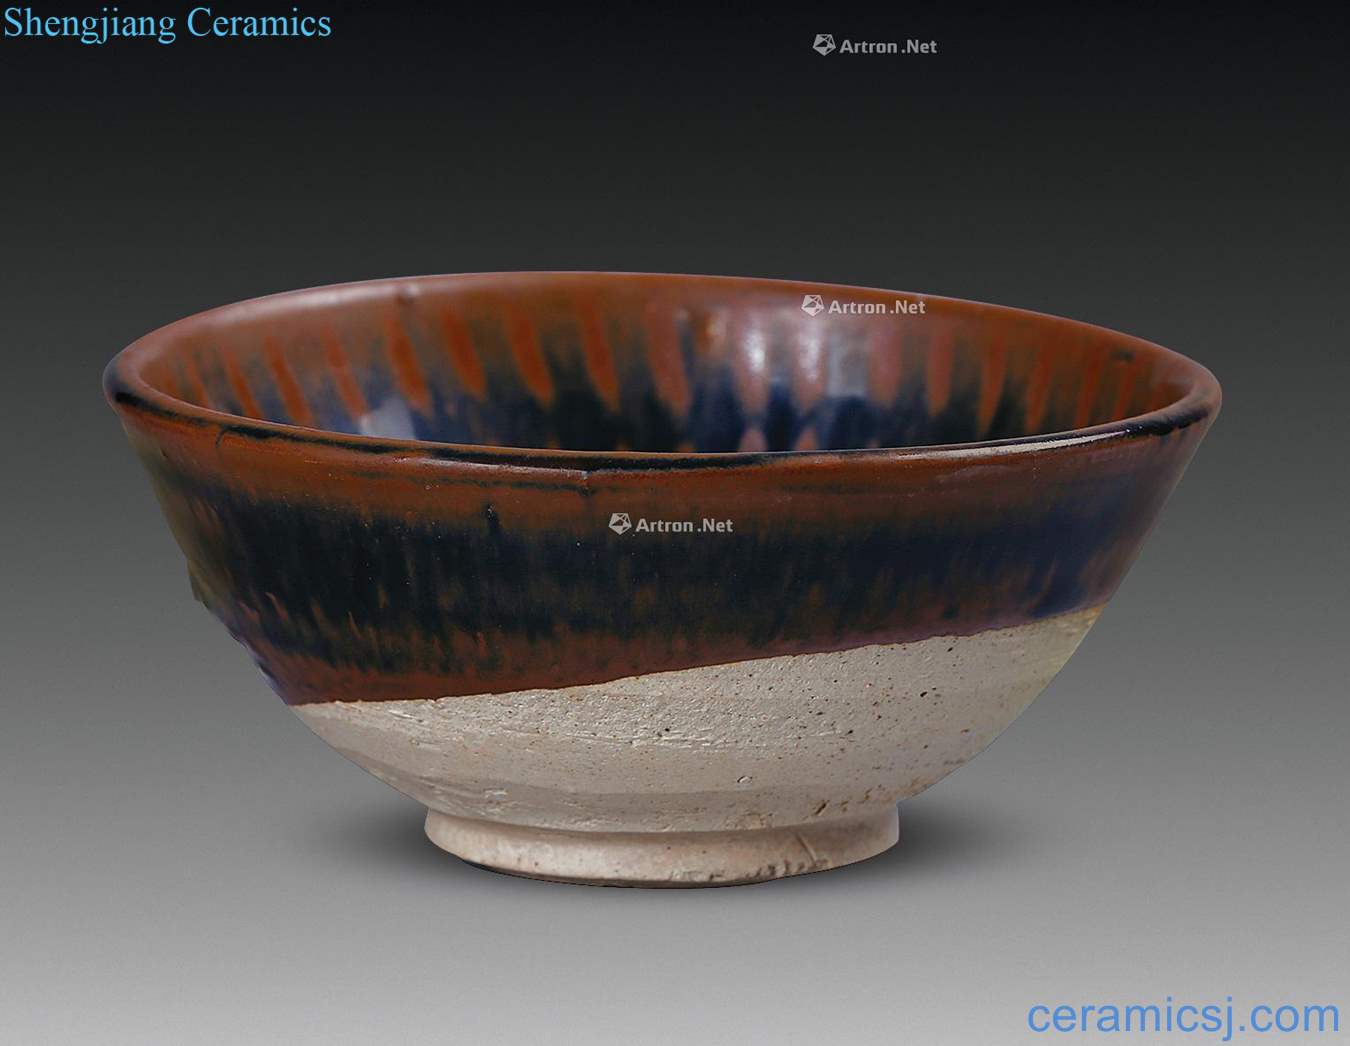 Song magnetic state kiln rust flower bowl (a)